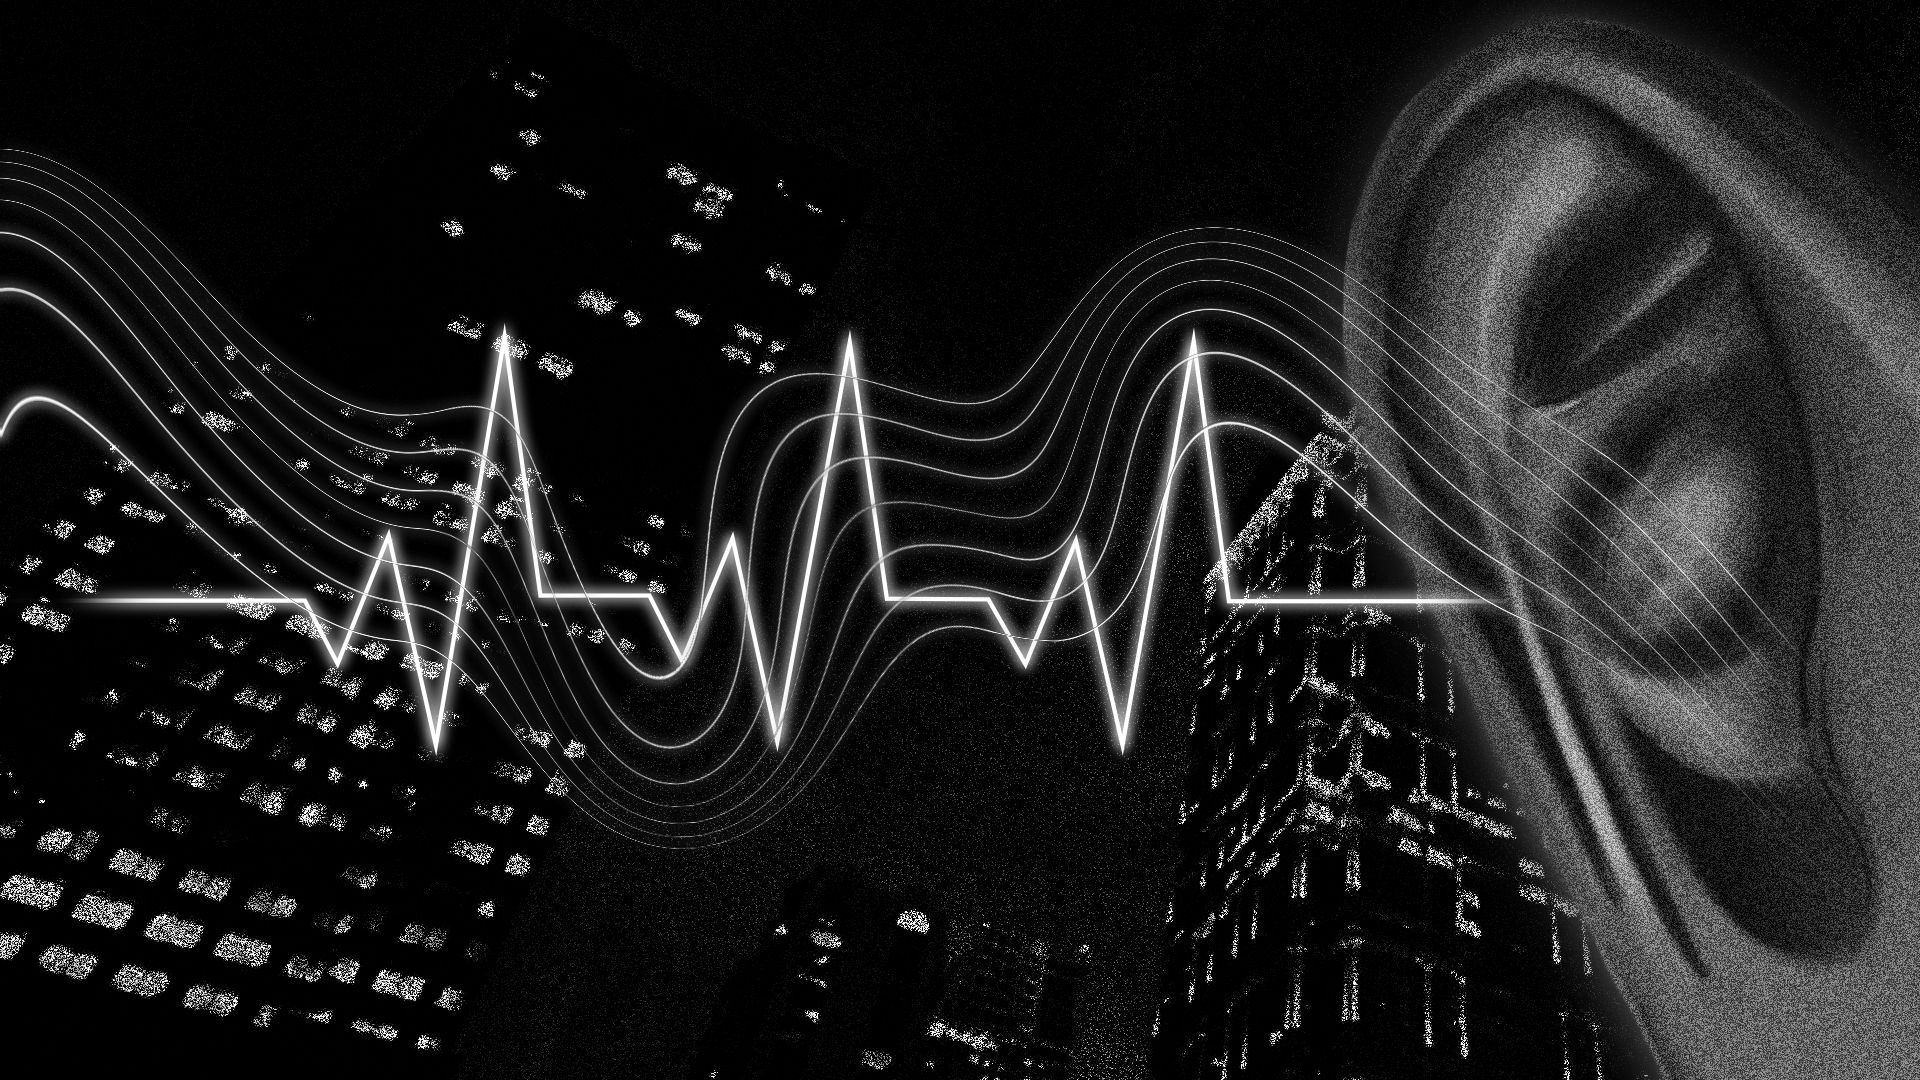 Image: A white-lined soundwave laid over the white lights of night-time buildings. The soundwave runs to a greyscale ear on the right side of the image. Illustration by Diana C. Pietrzyk.